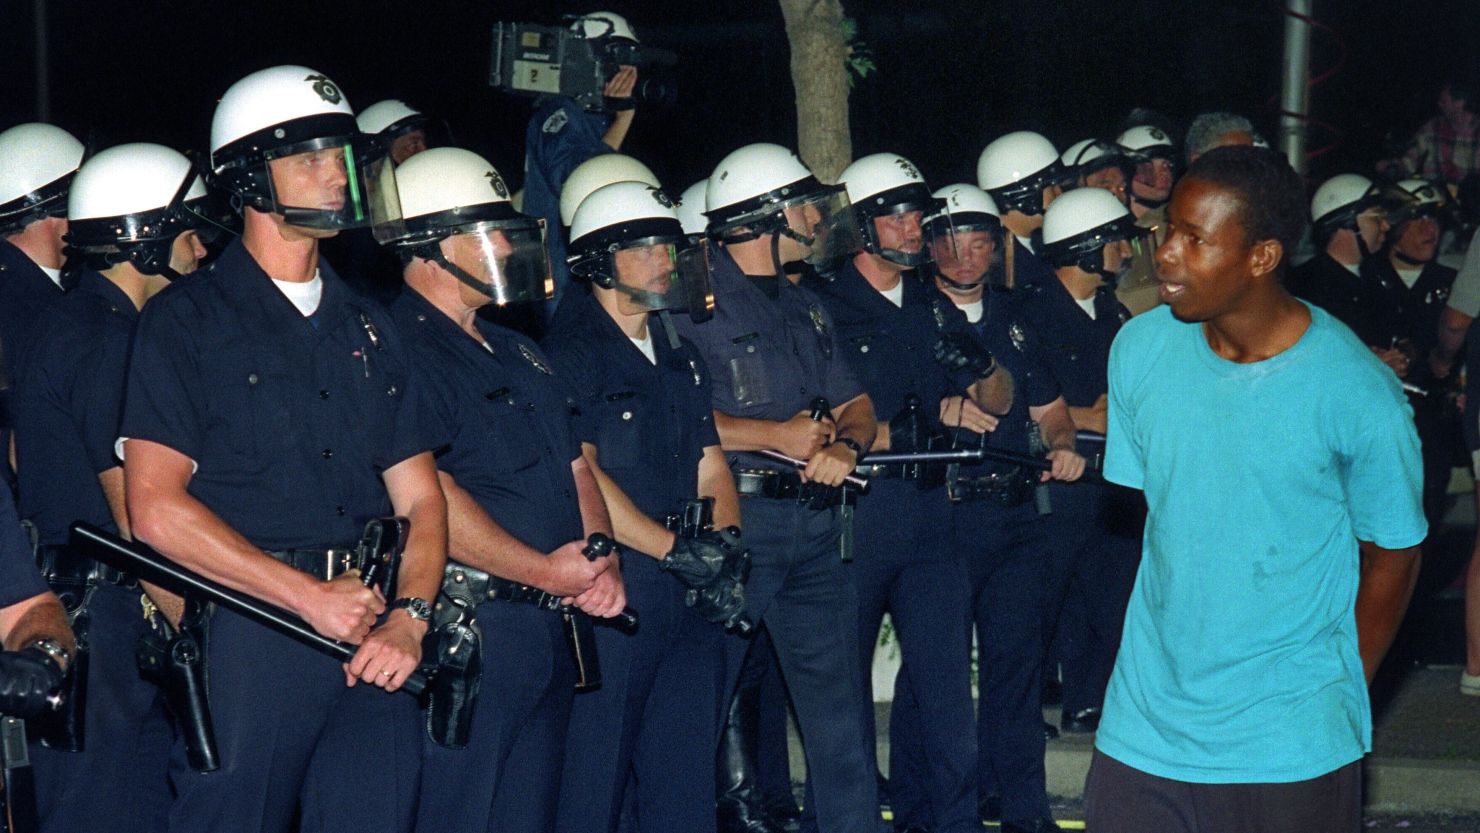 A man passes in front of a line of policemen in Los Angeles, 30 April 1992. Riots broke out in Los Angeles after a jury acquitted four police officers accused of beating a black youth, Rodney King, in 1991, hours after the verdict was announced.      